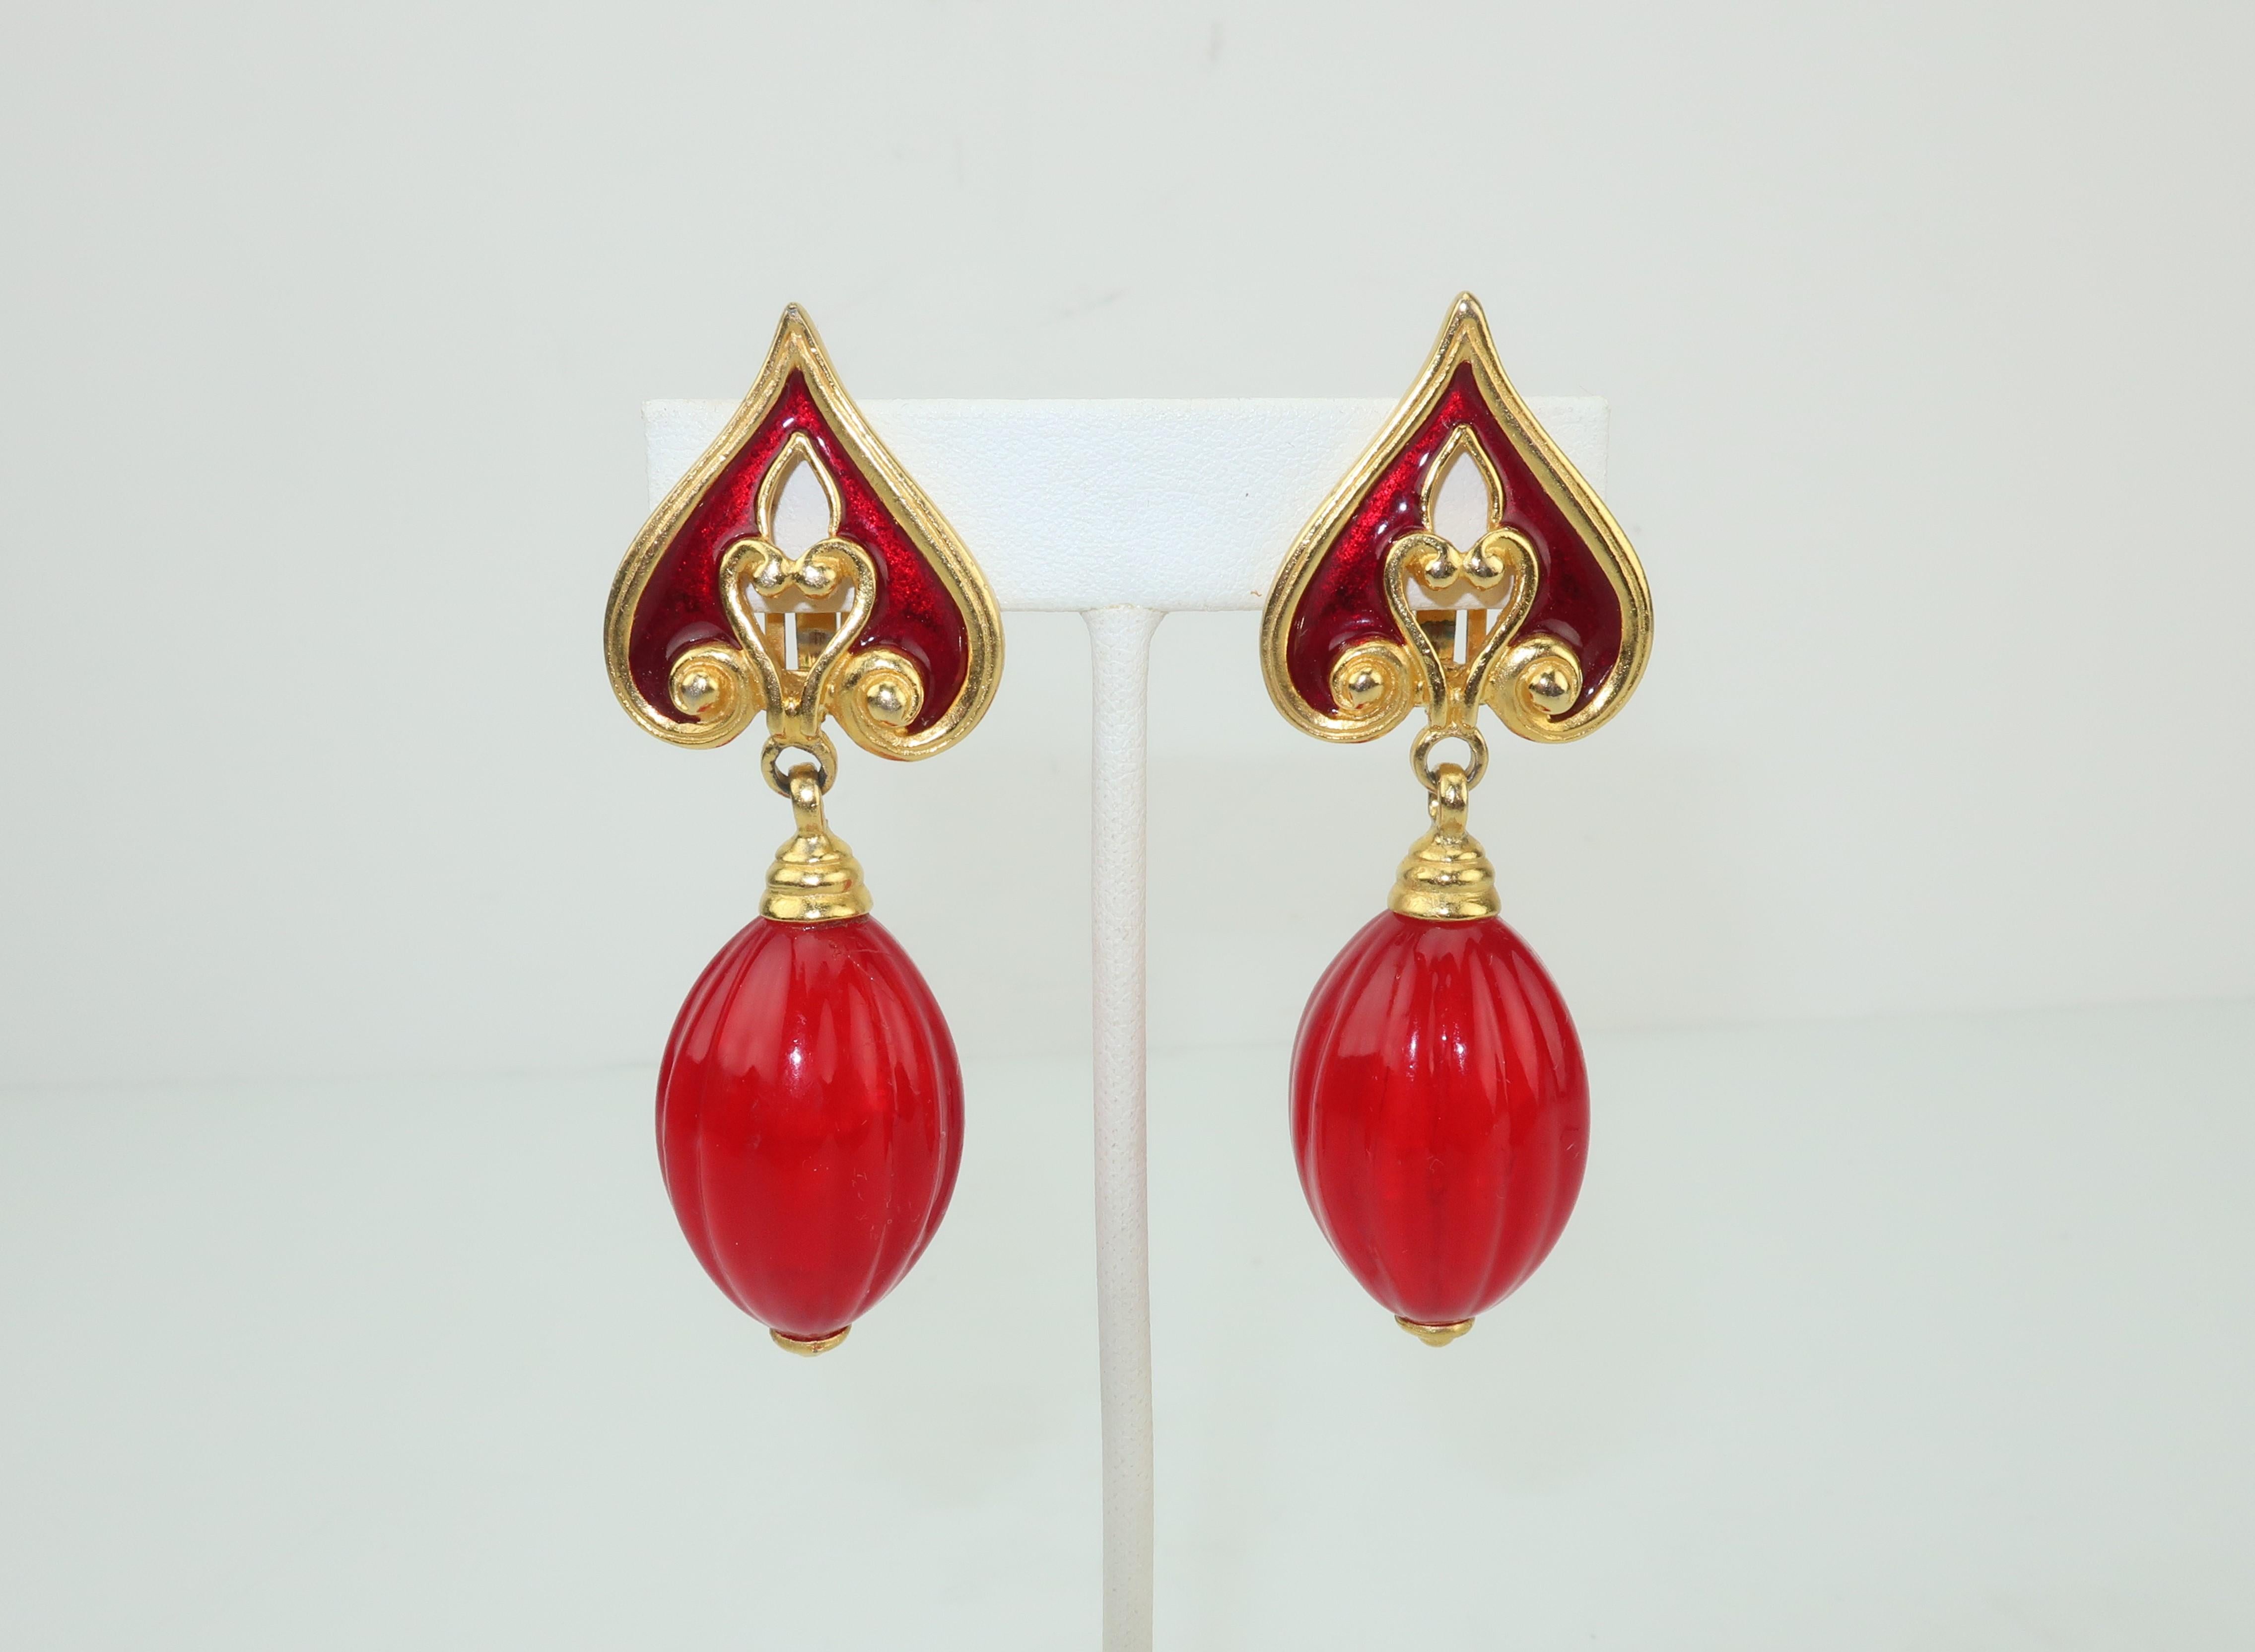 Red and gold ... a stunning combination!  This lovely dangle clip on earring by Issac Manevitz for his jewelry line, Ben-Amun, is an excellent example of sophisticated style.  The spade shaped gold tone base is decorated with swirls and a red enamel